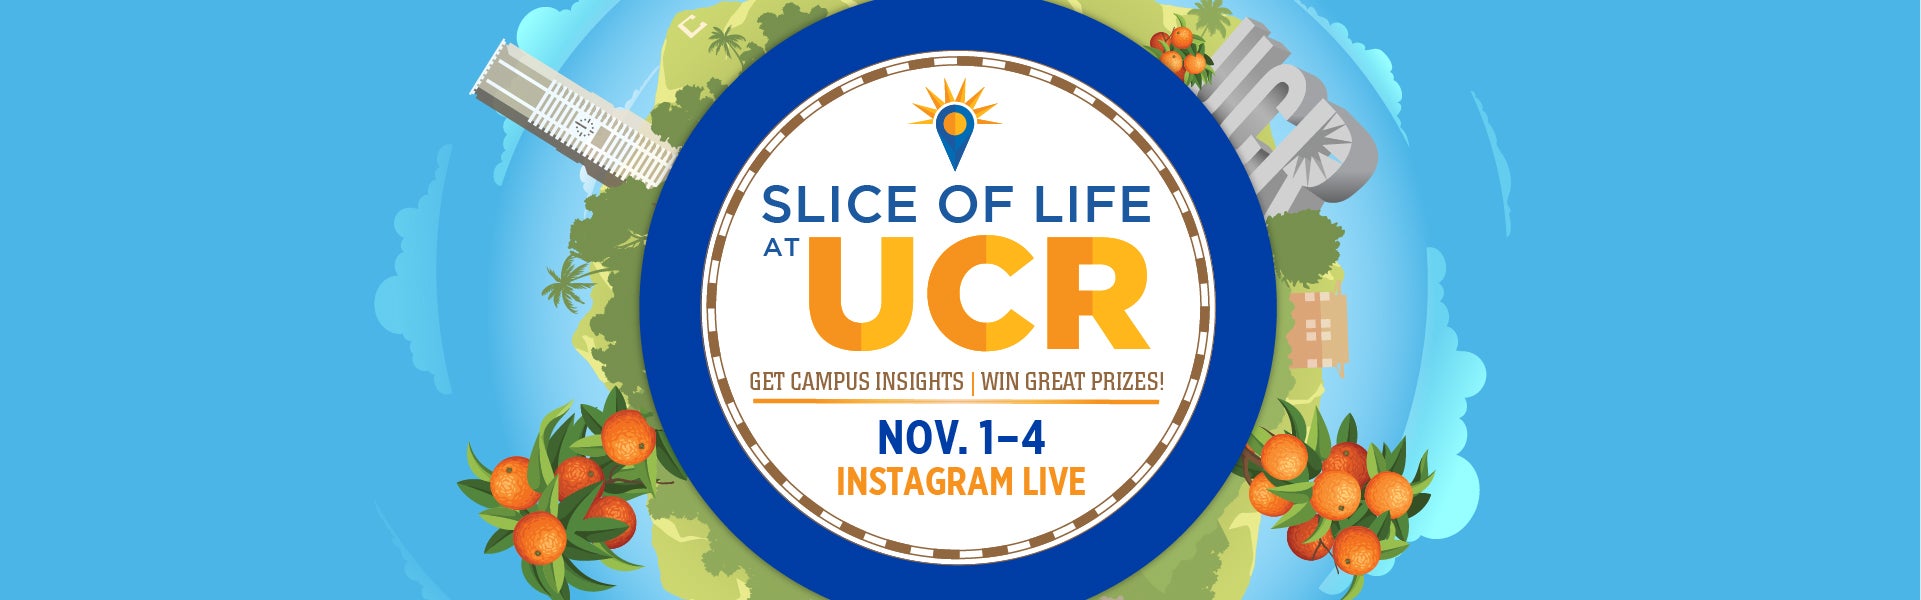 Image promoting Slice of Life at UCR event